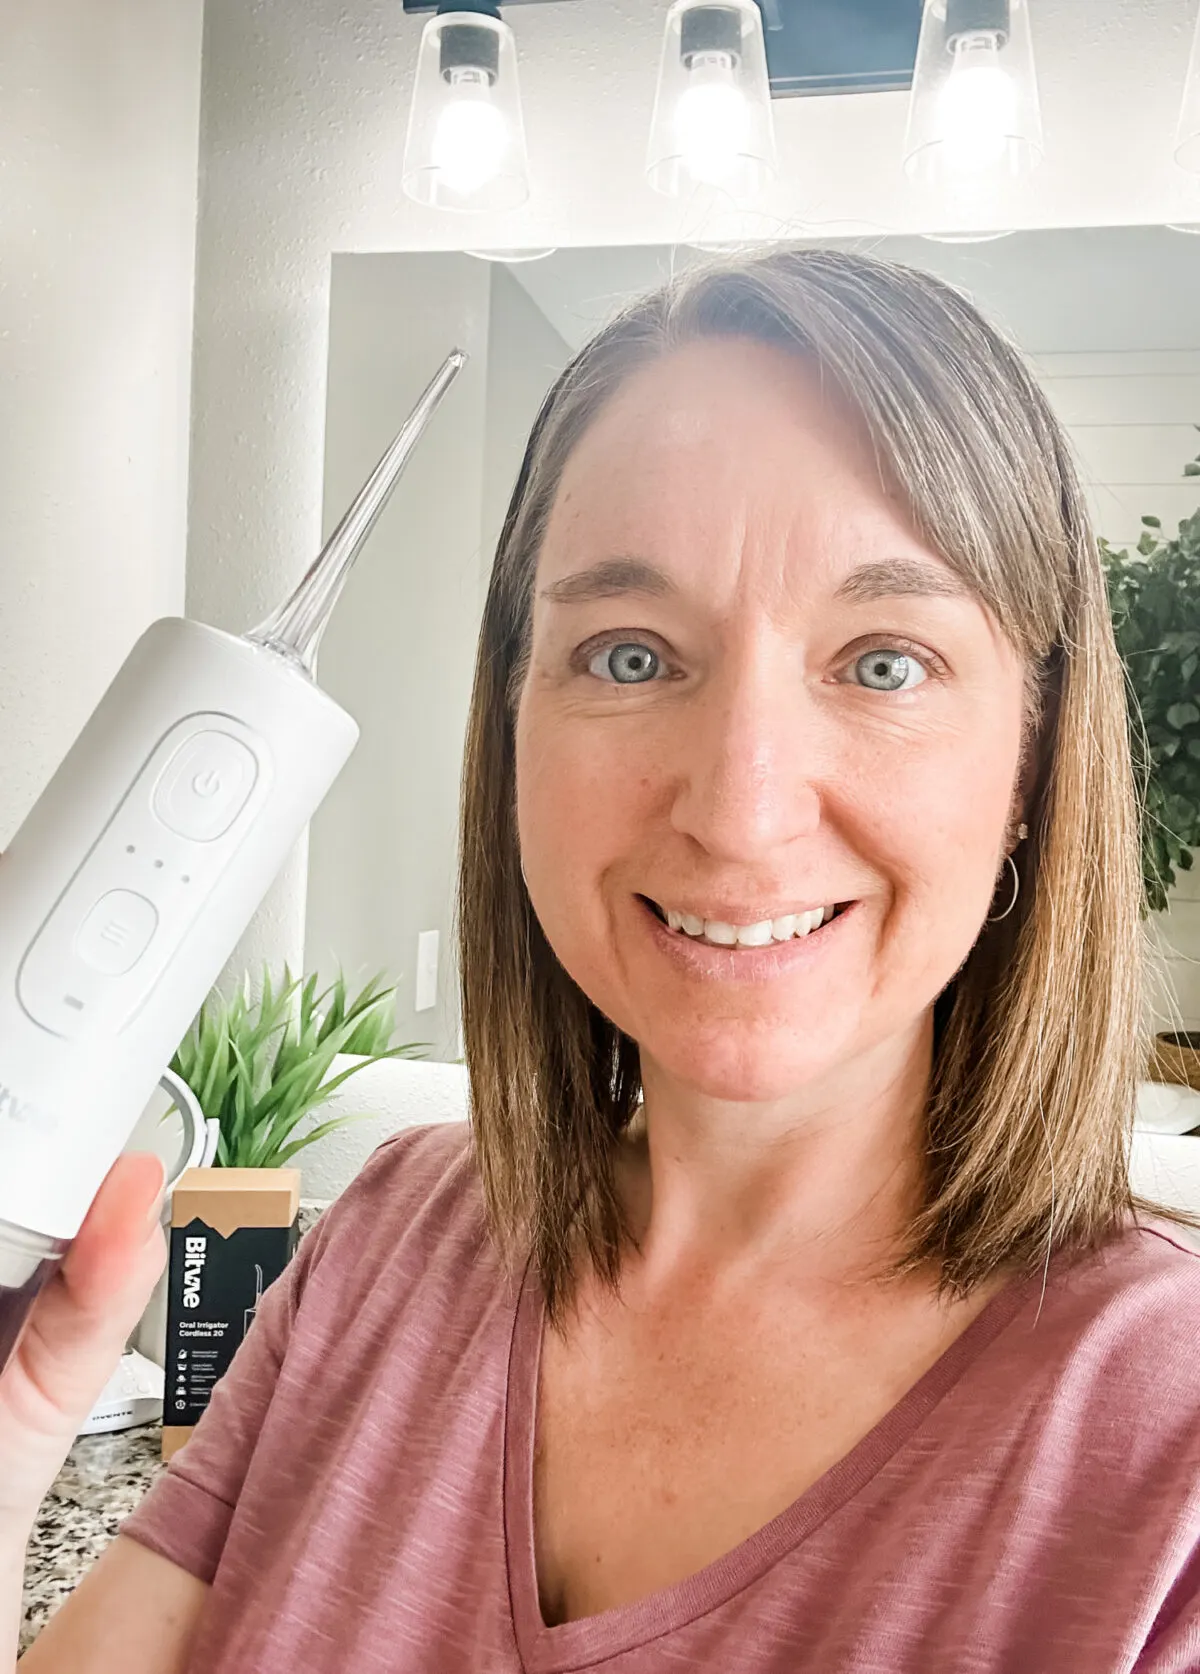 Bitvae Water Flosser: The Dental Tool You Need For A Healthy Mouth